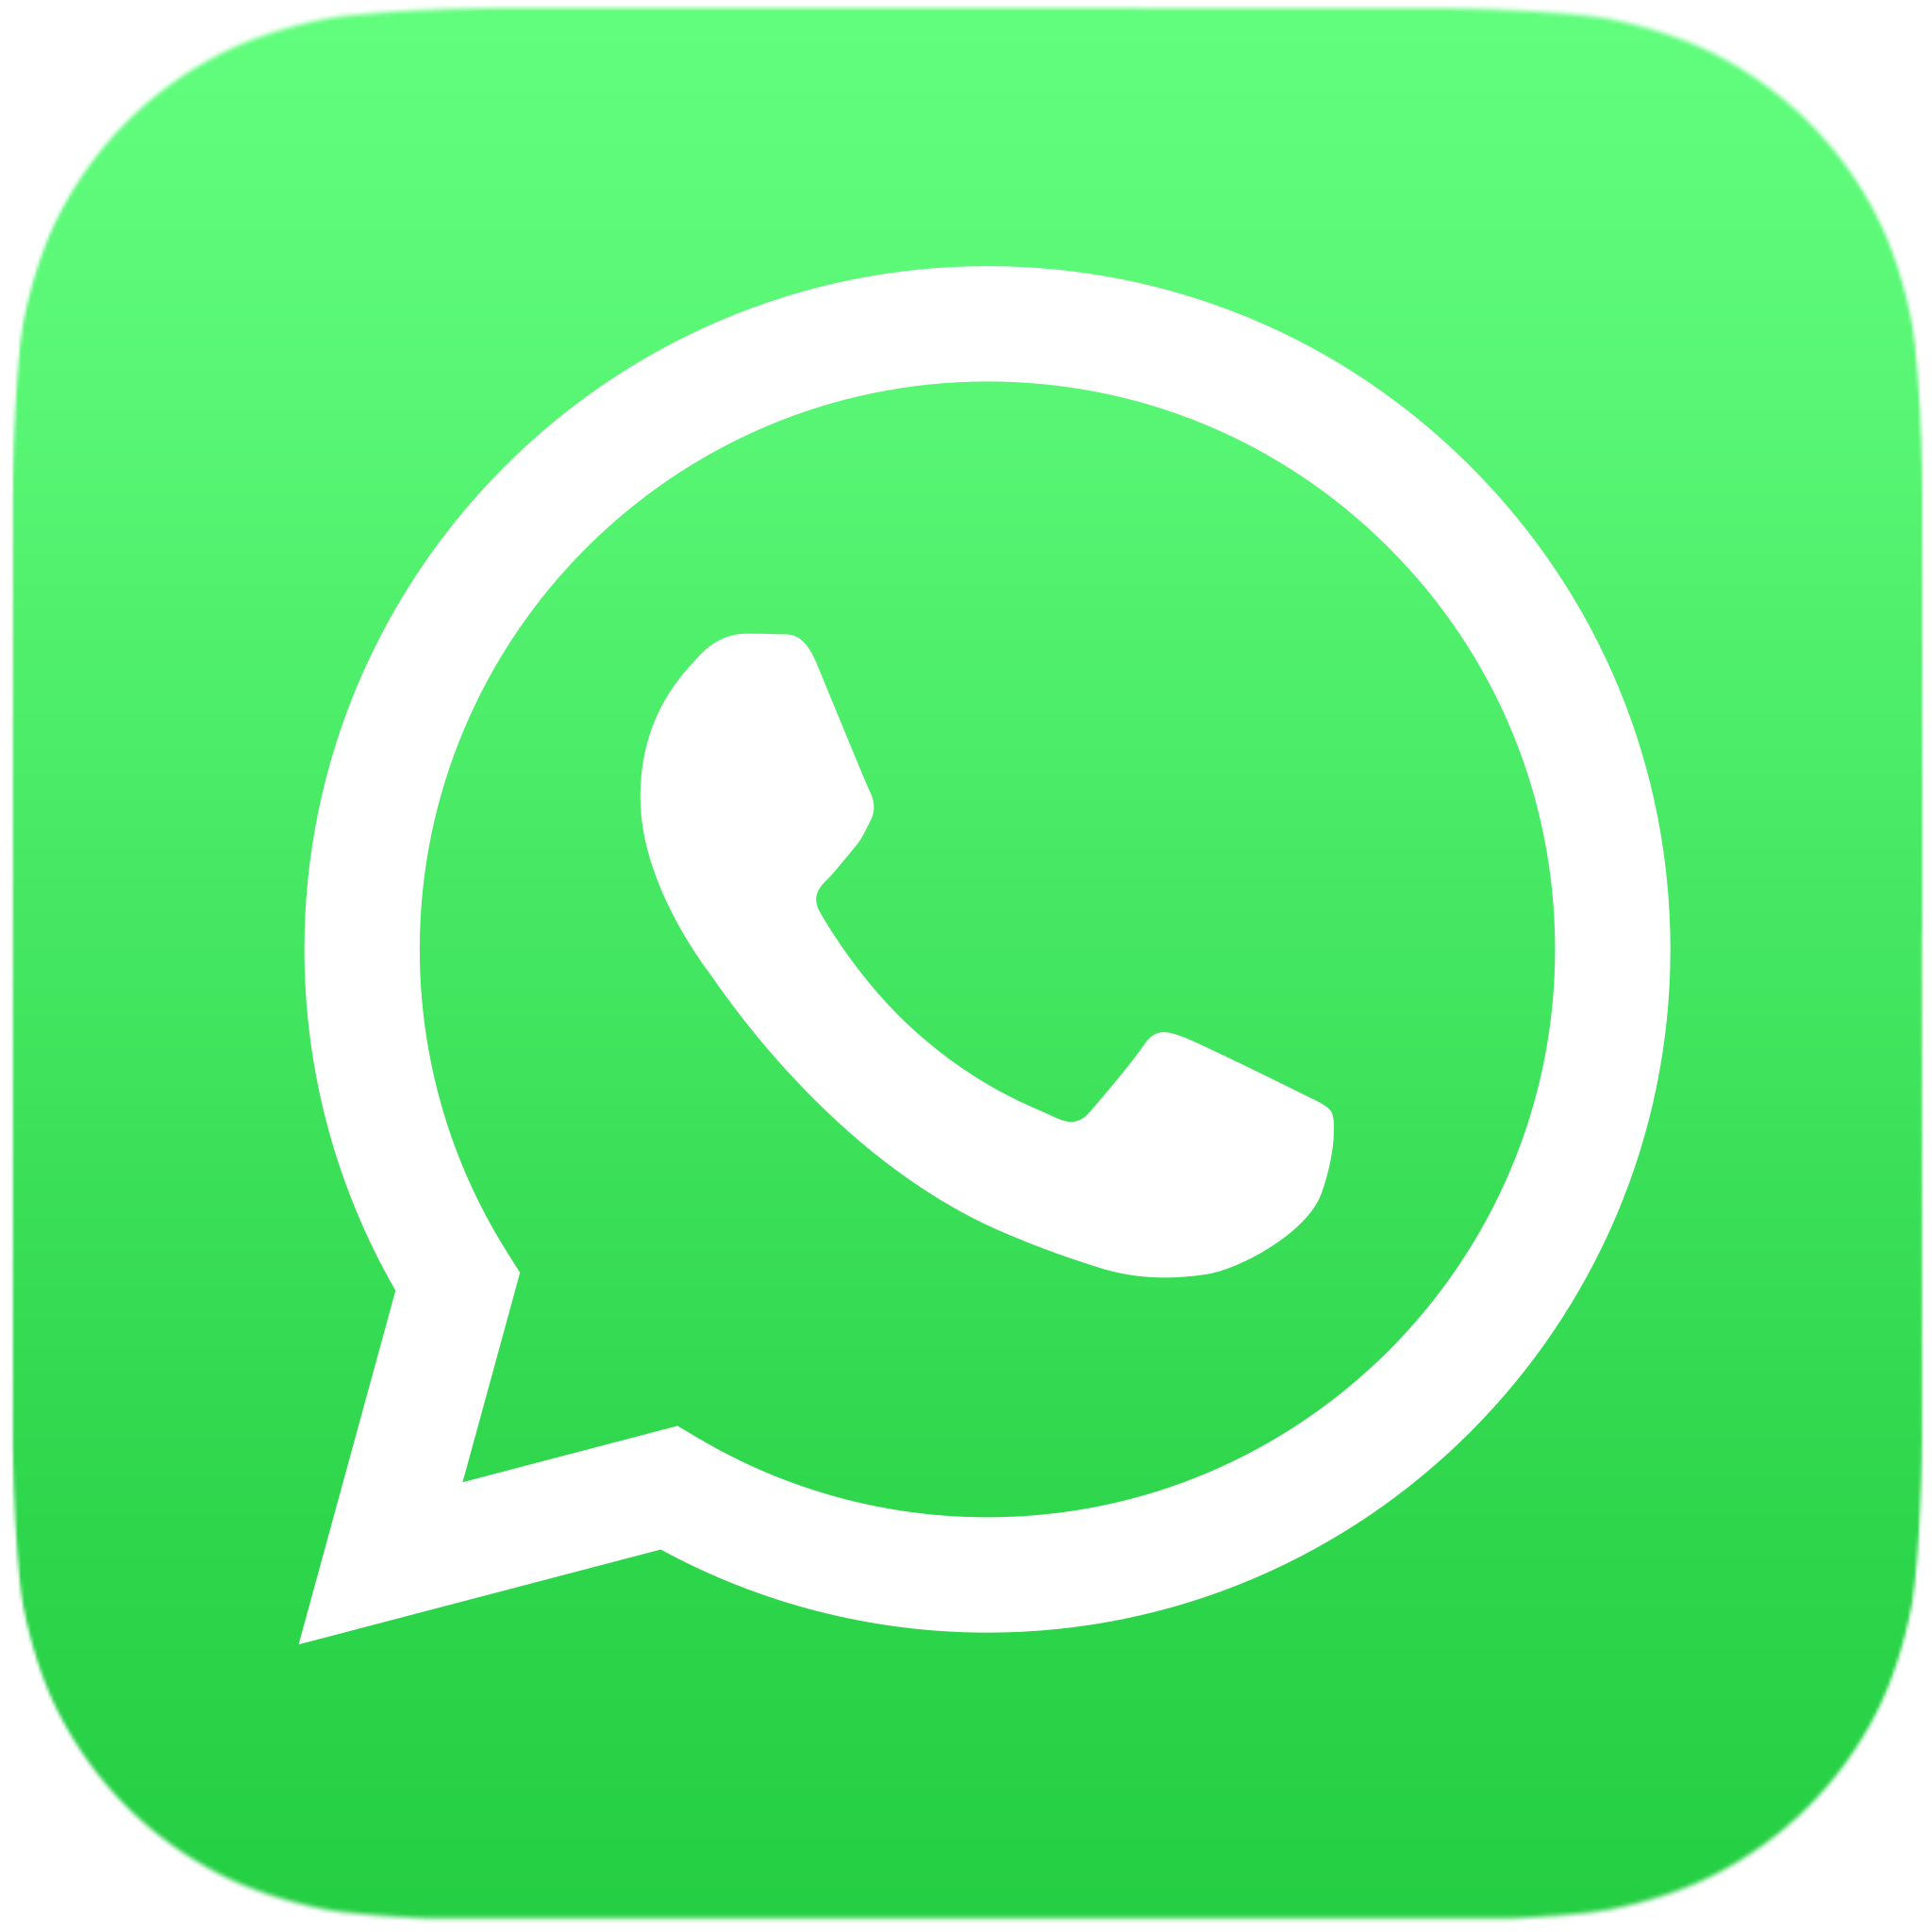 File:WhatsApp logo-color-vertical.svg - Wikimedia Commons